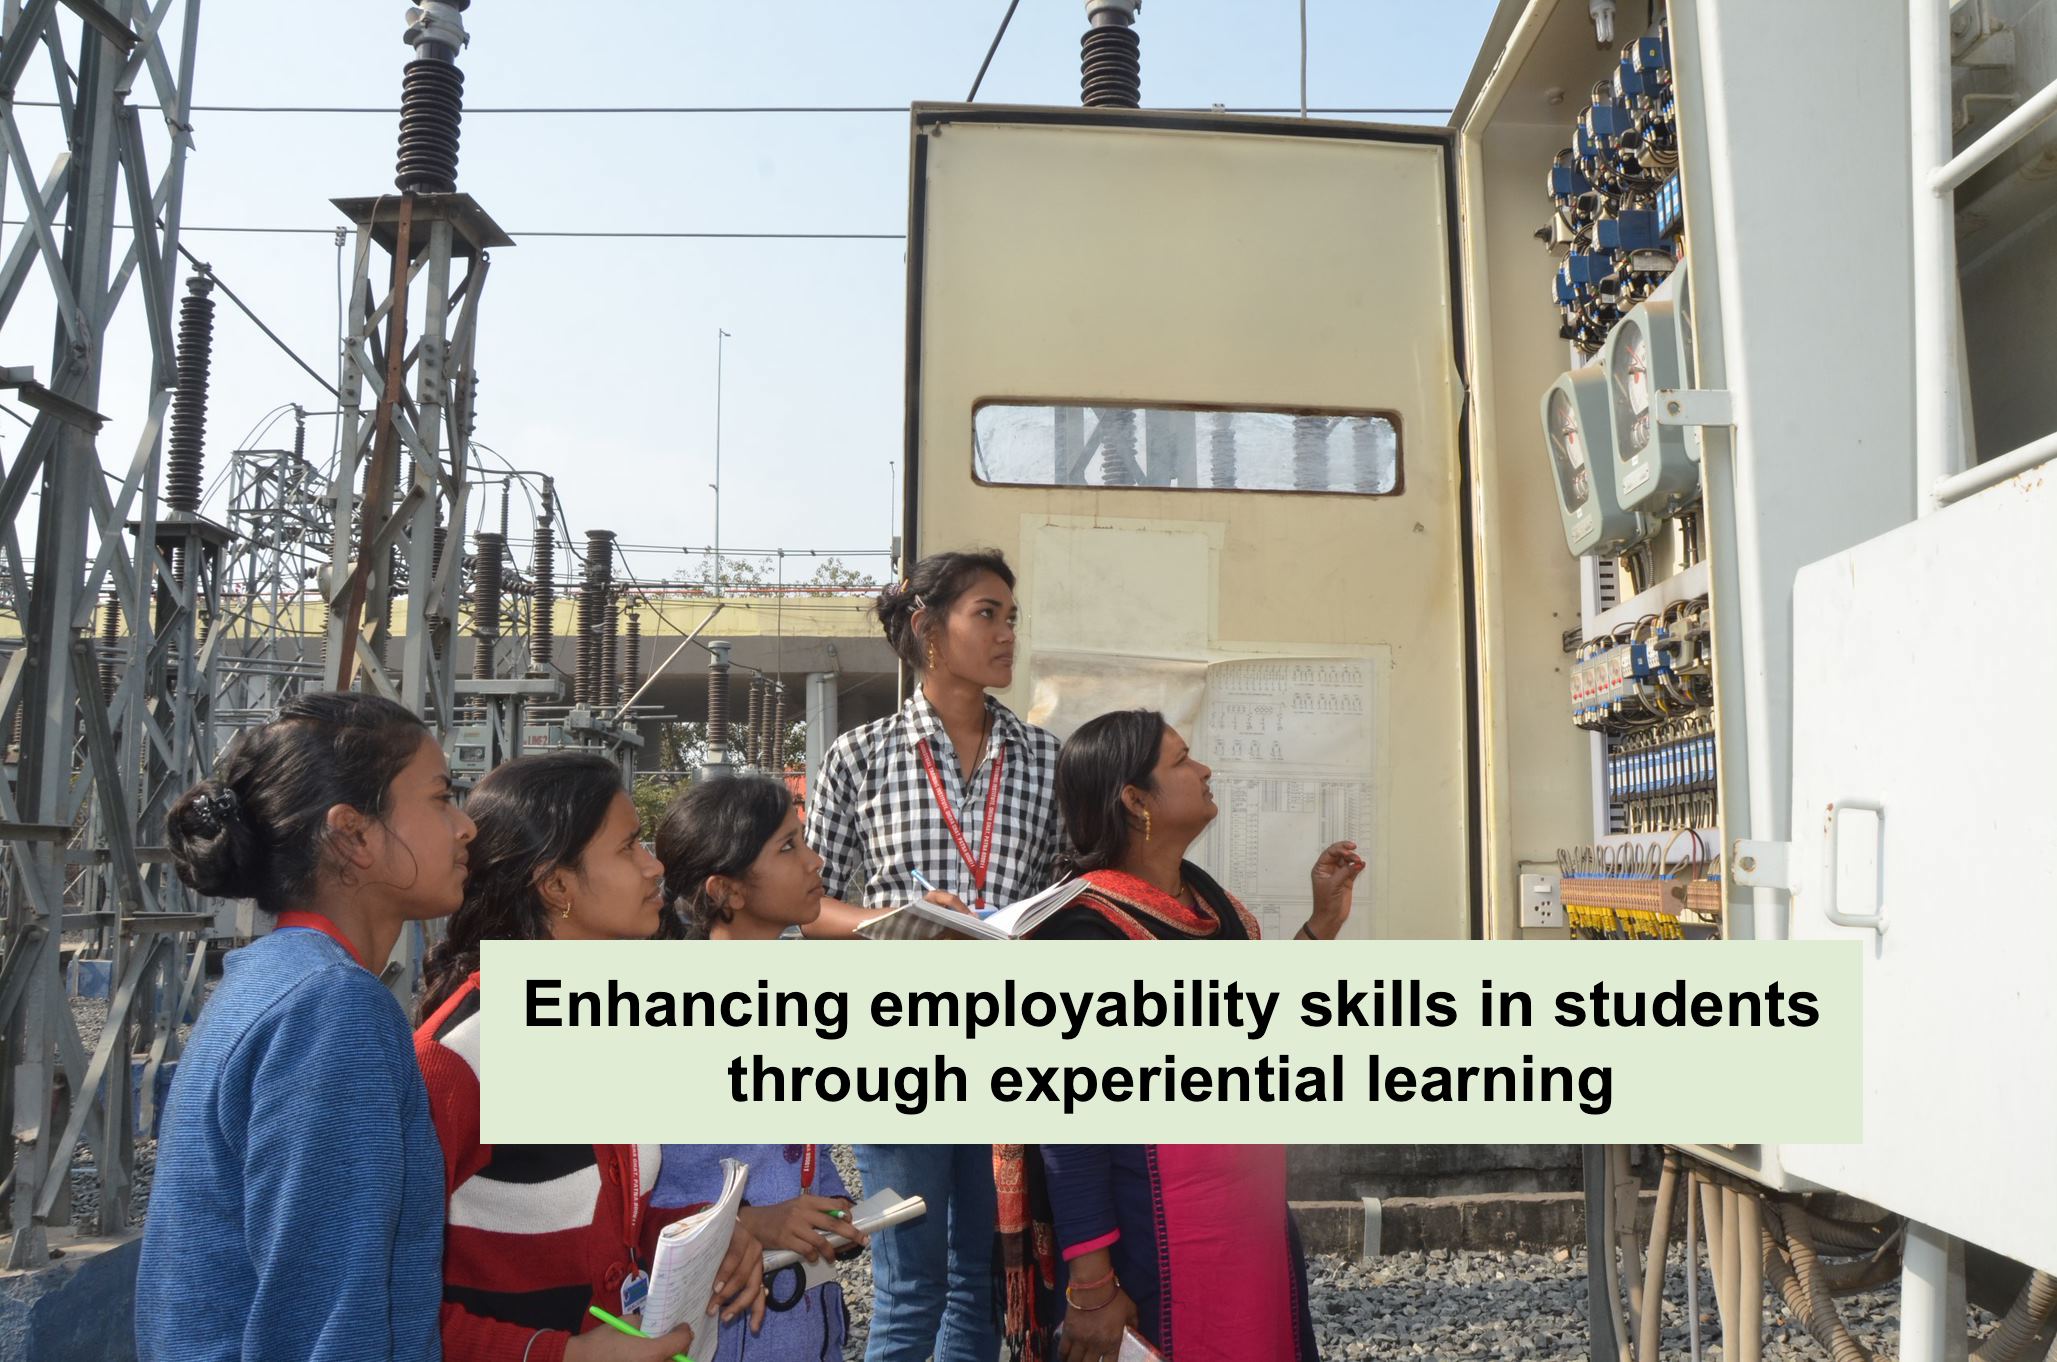 Enhancing employability skills through experiential learning